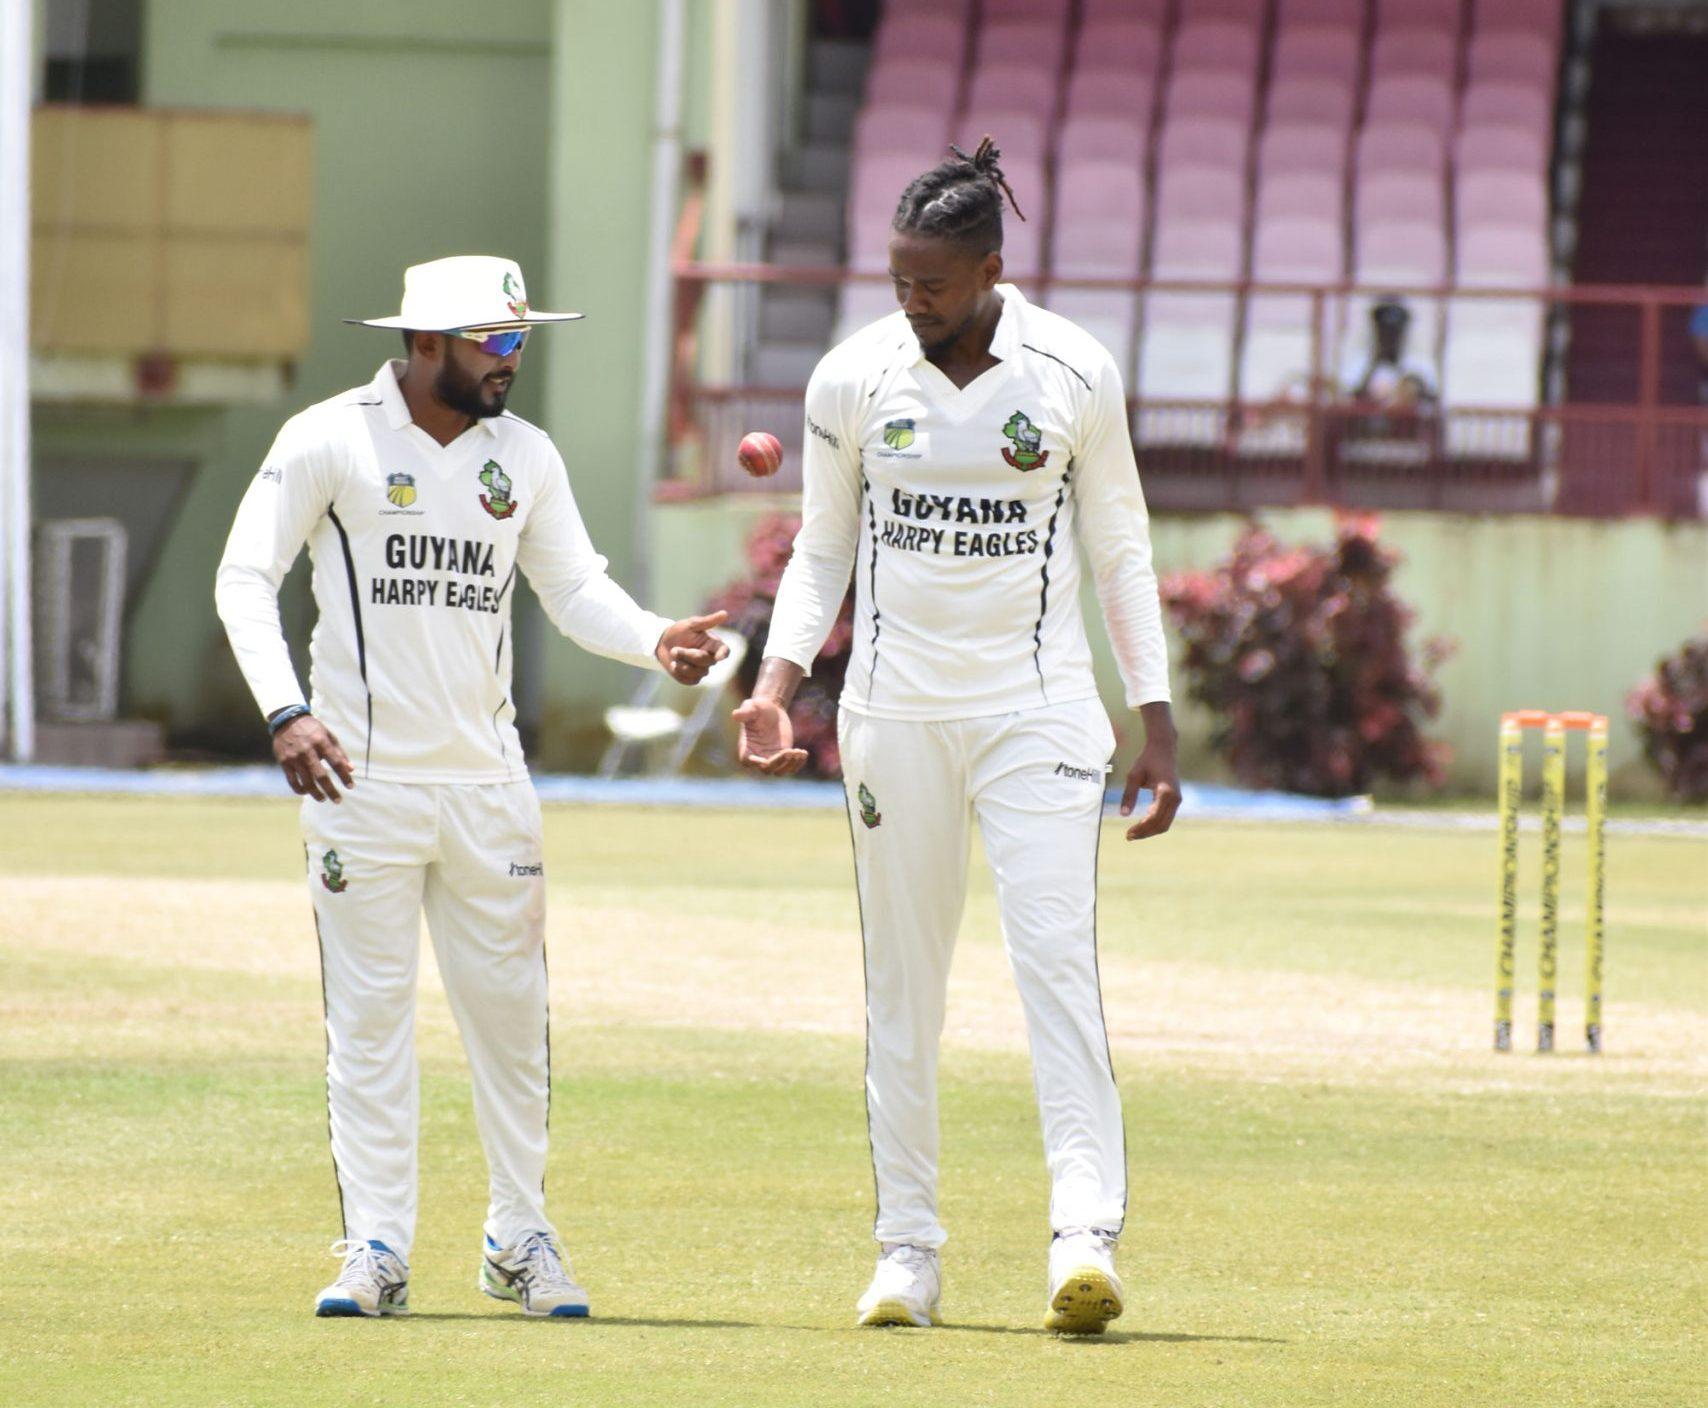 Veerasammy Permaul (left) and Ronsford Beaton share 40 wickets between them this season.